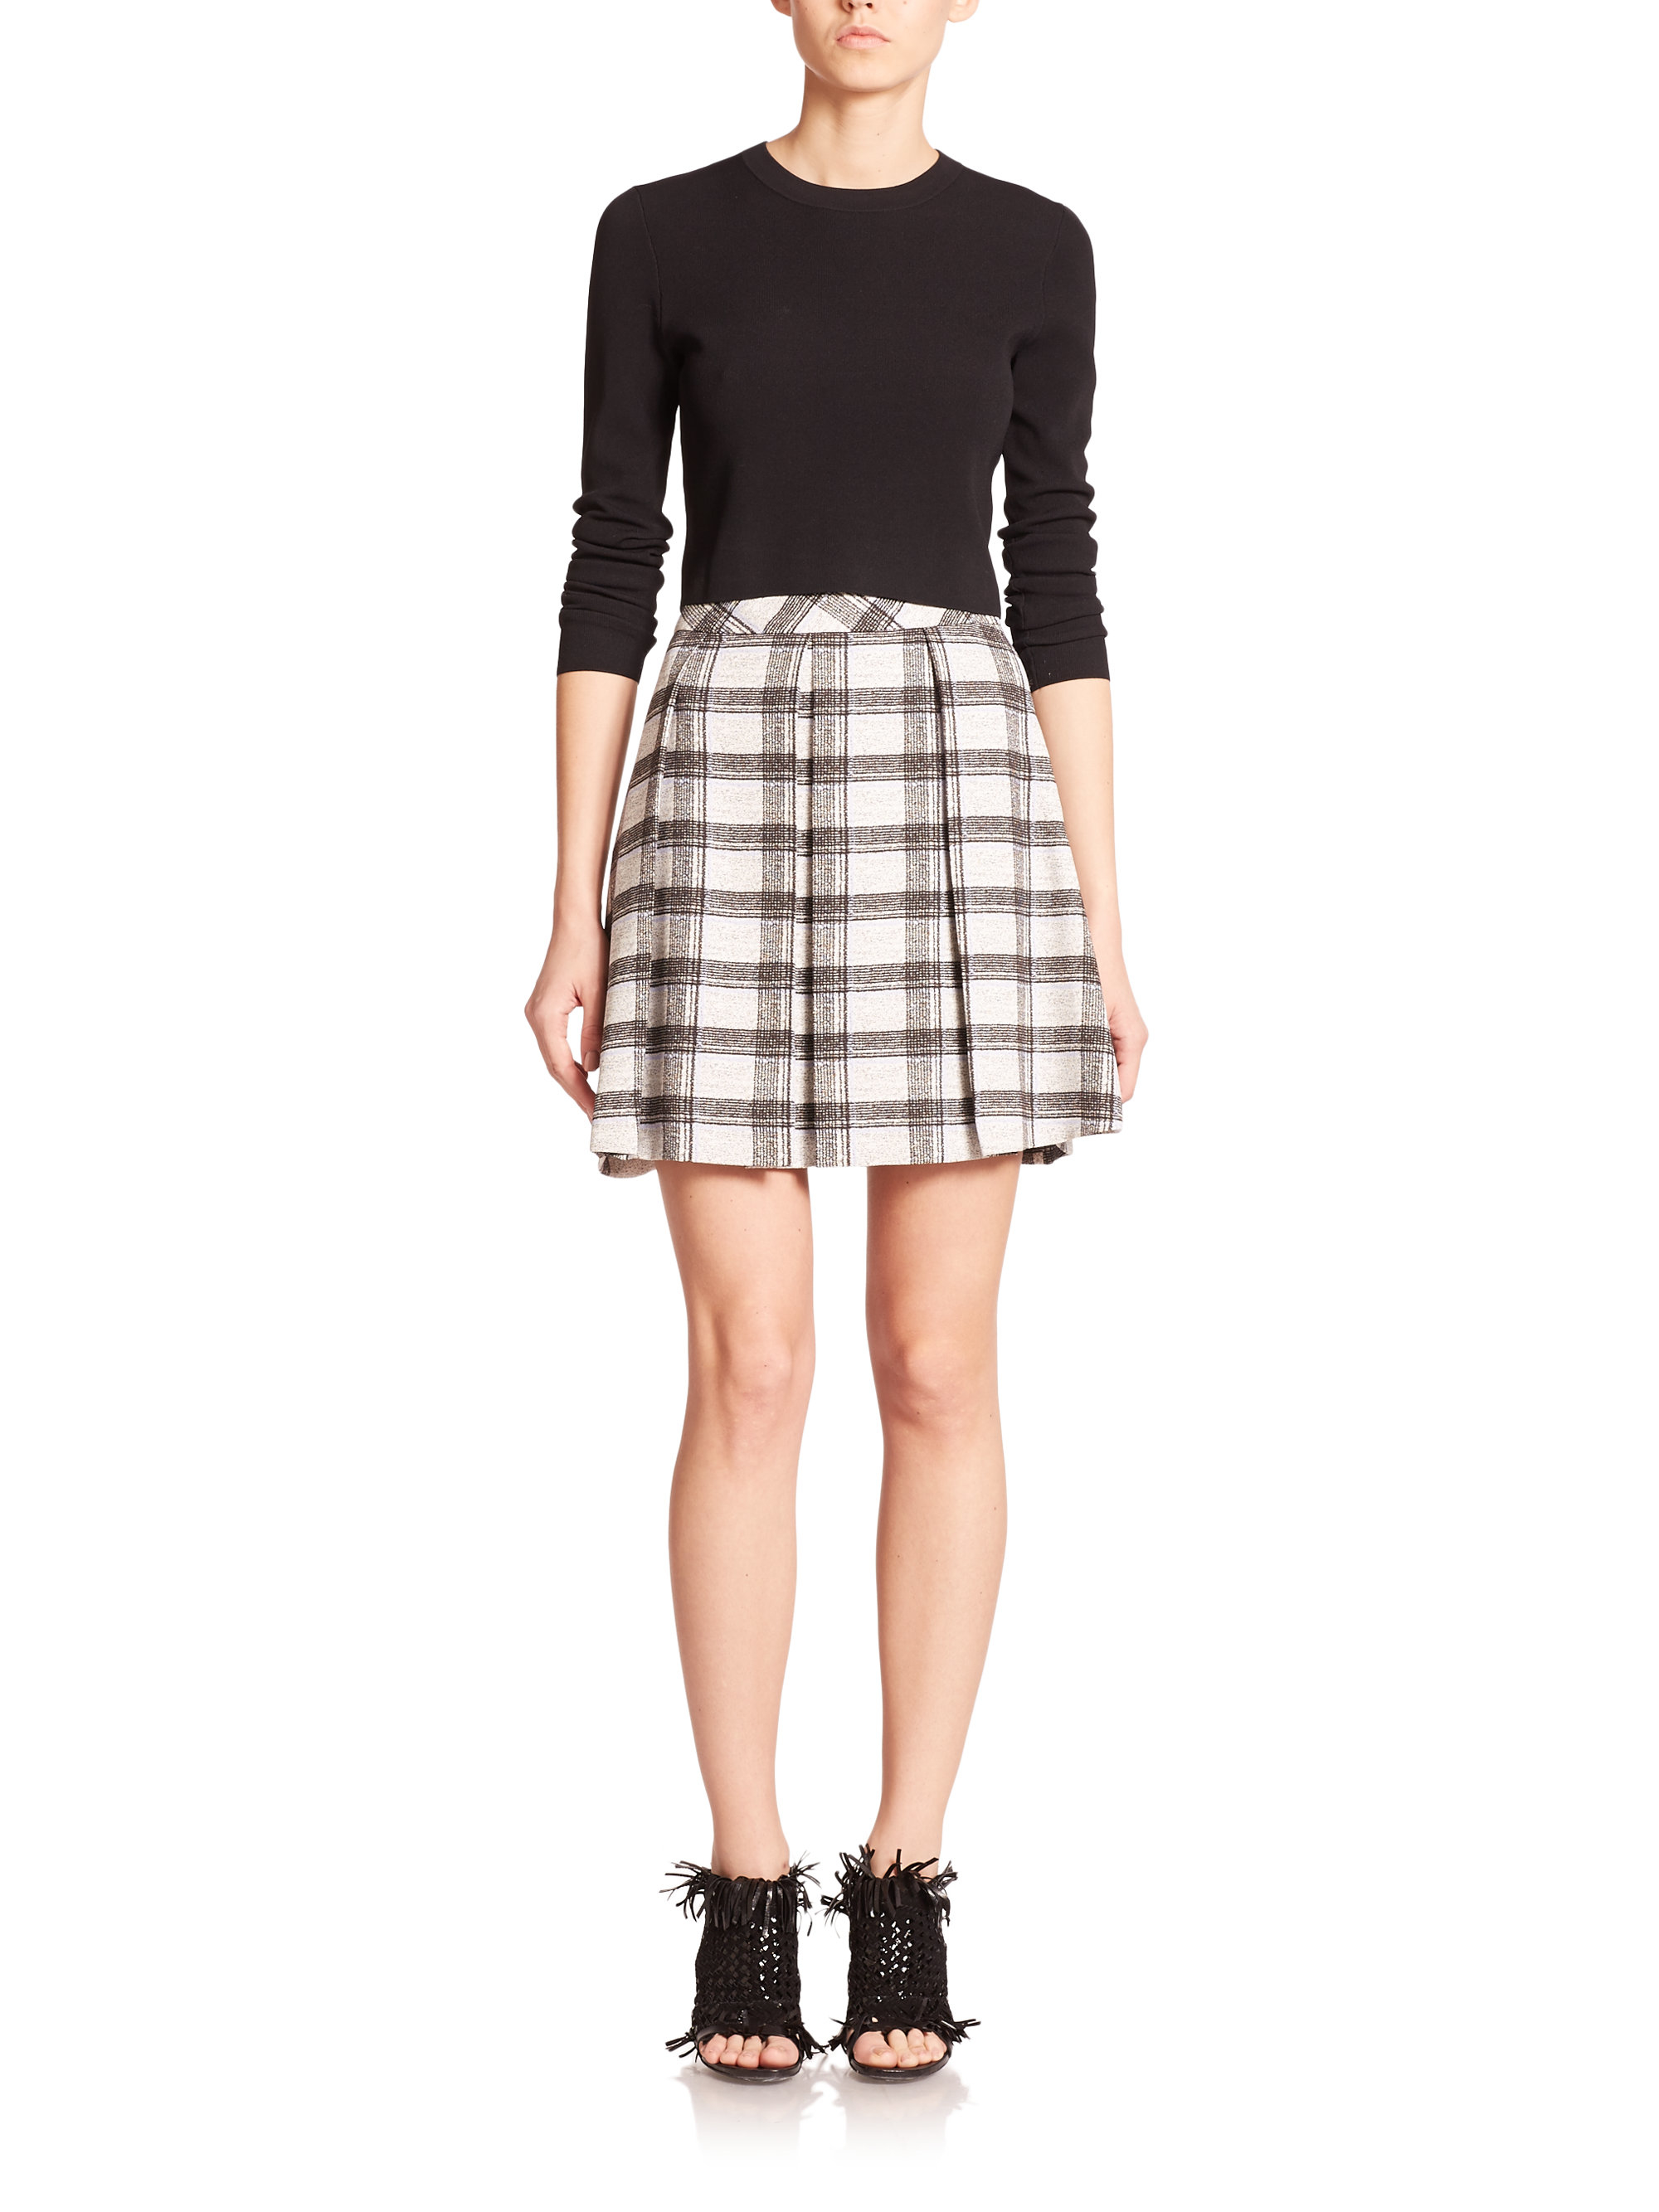 Lyst - Proenza Schouler Pleated Plaid Skirt in White